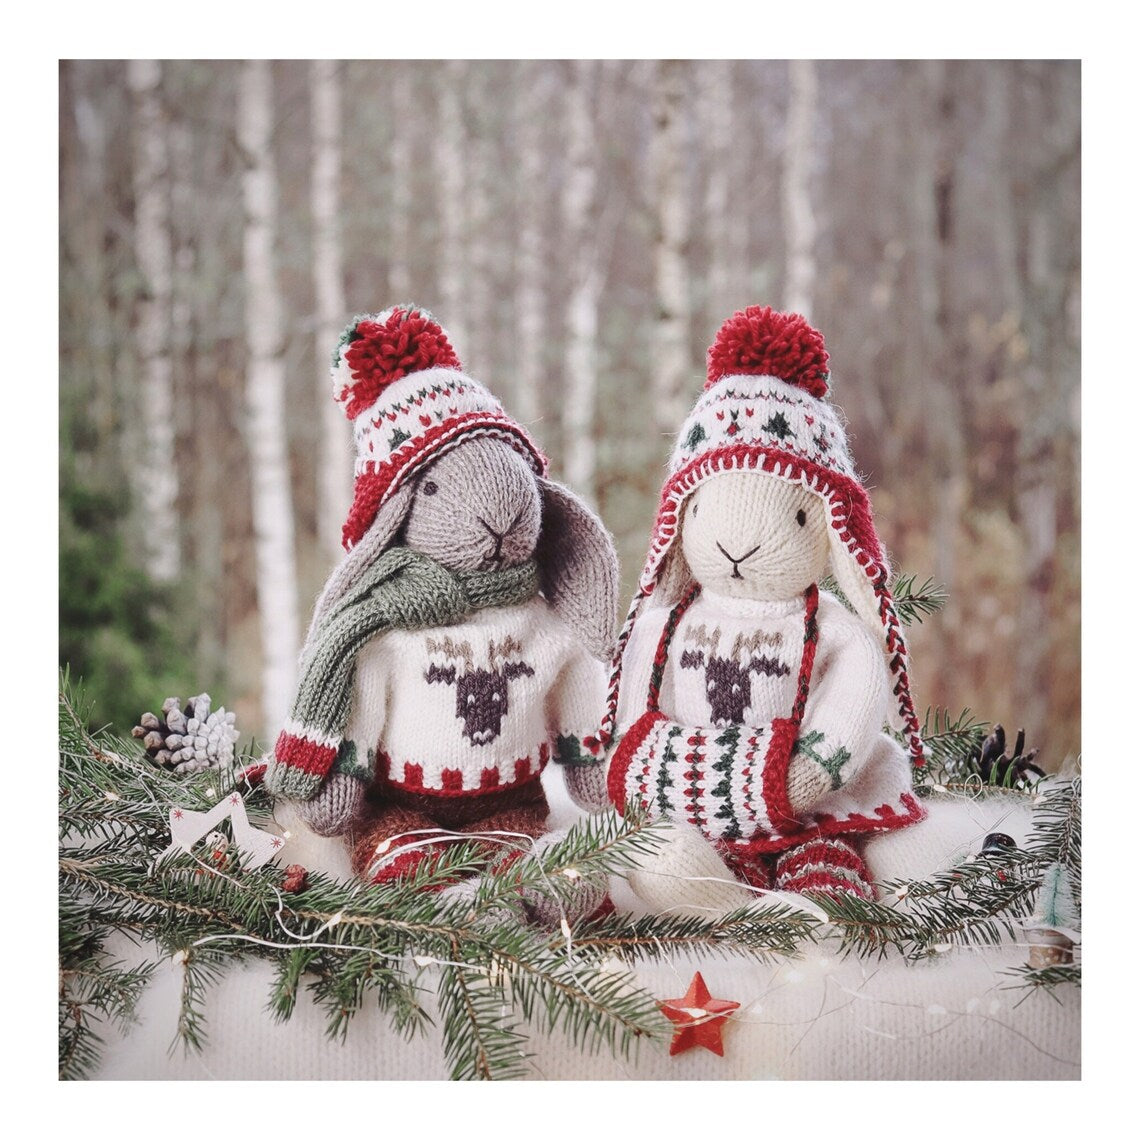 Сhristmas bunny and Сhristmas outfits patterns, Doll knitting pattern